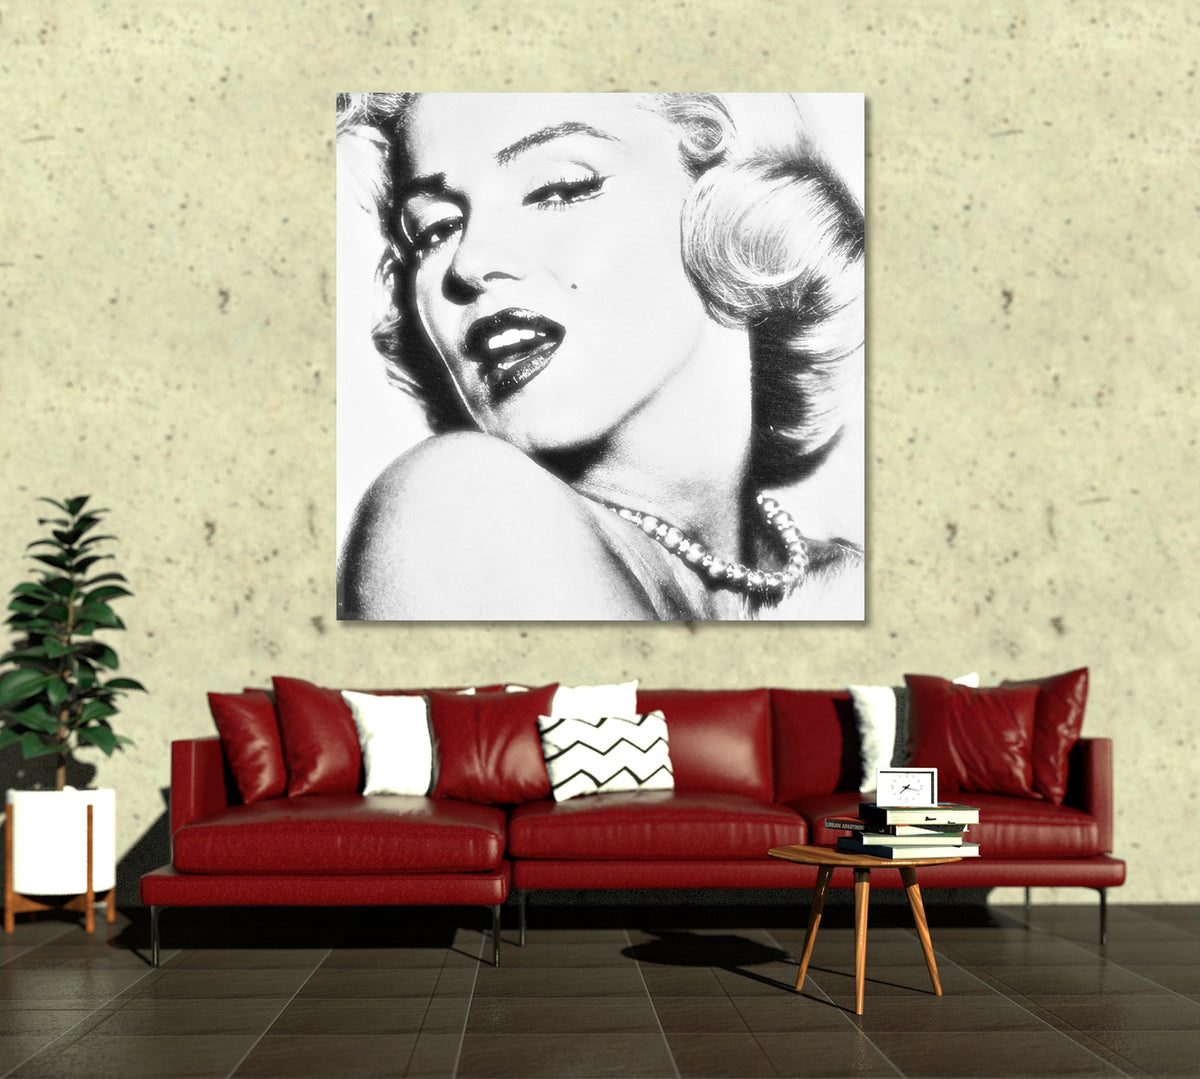 MARILYN MONROE Movie Star Marilyn Monroe Famous Posing Black and White Vinage - Square Panel Celebs Canvas Print Artesty 1 Panel 12"x12" 